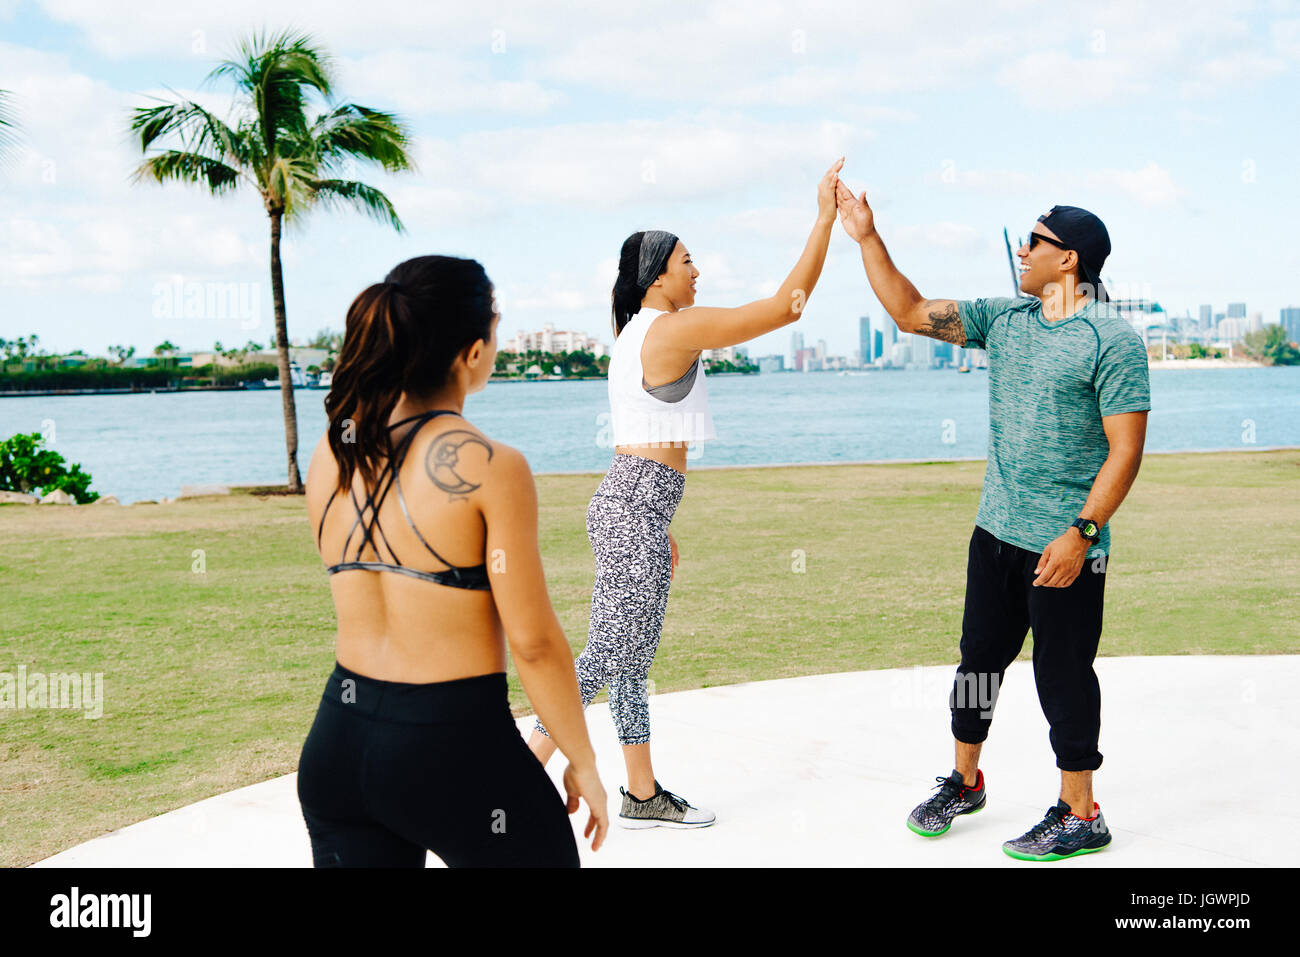 Young woman celebrating workout with personal trainer, South Point Park, Miami Beach, Florida, USA Stock Photo